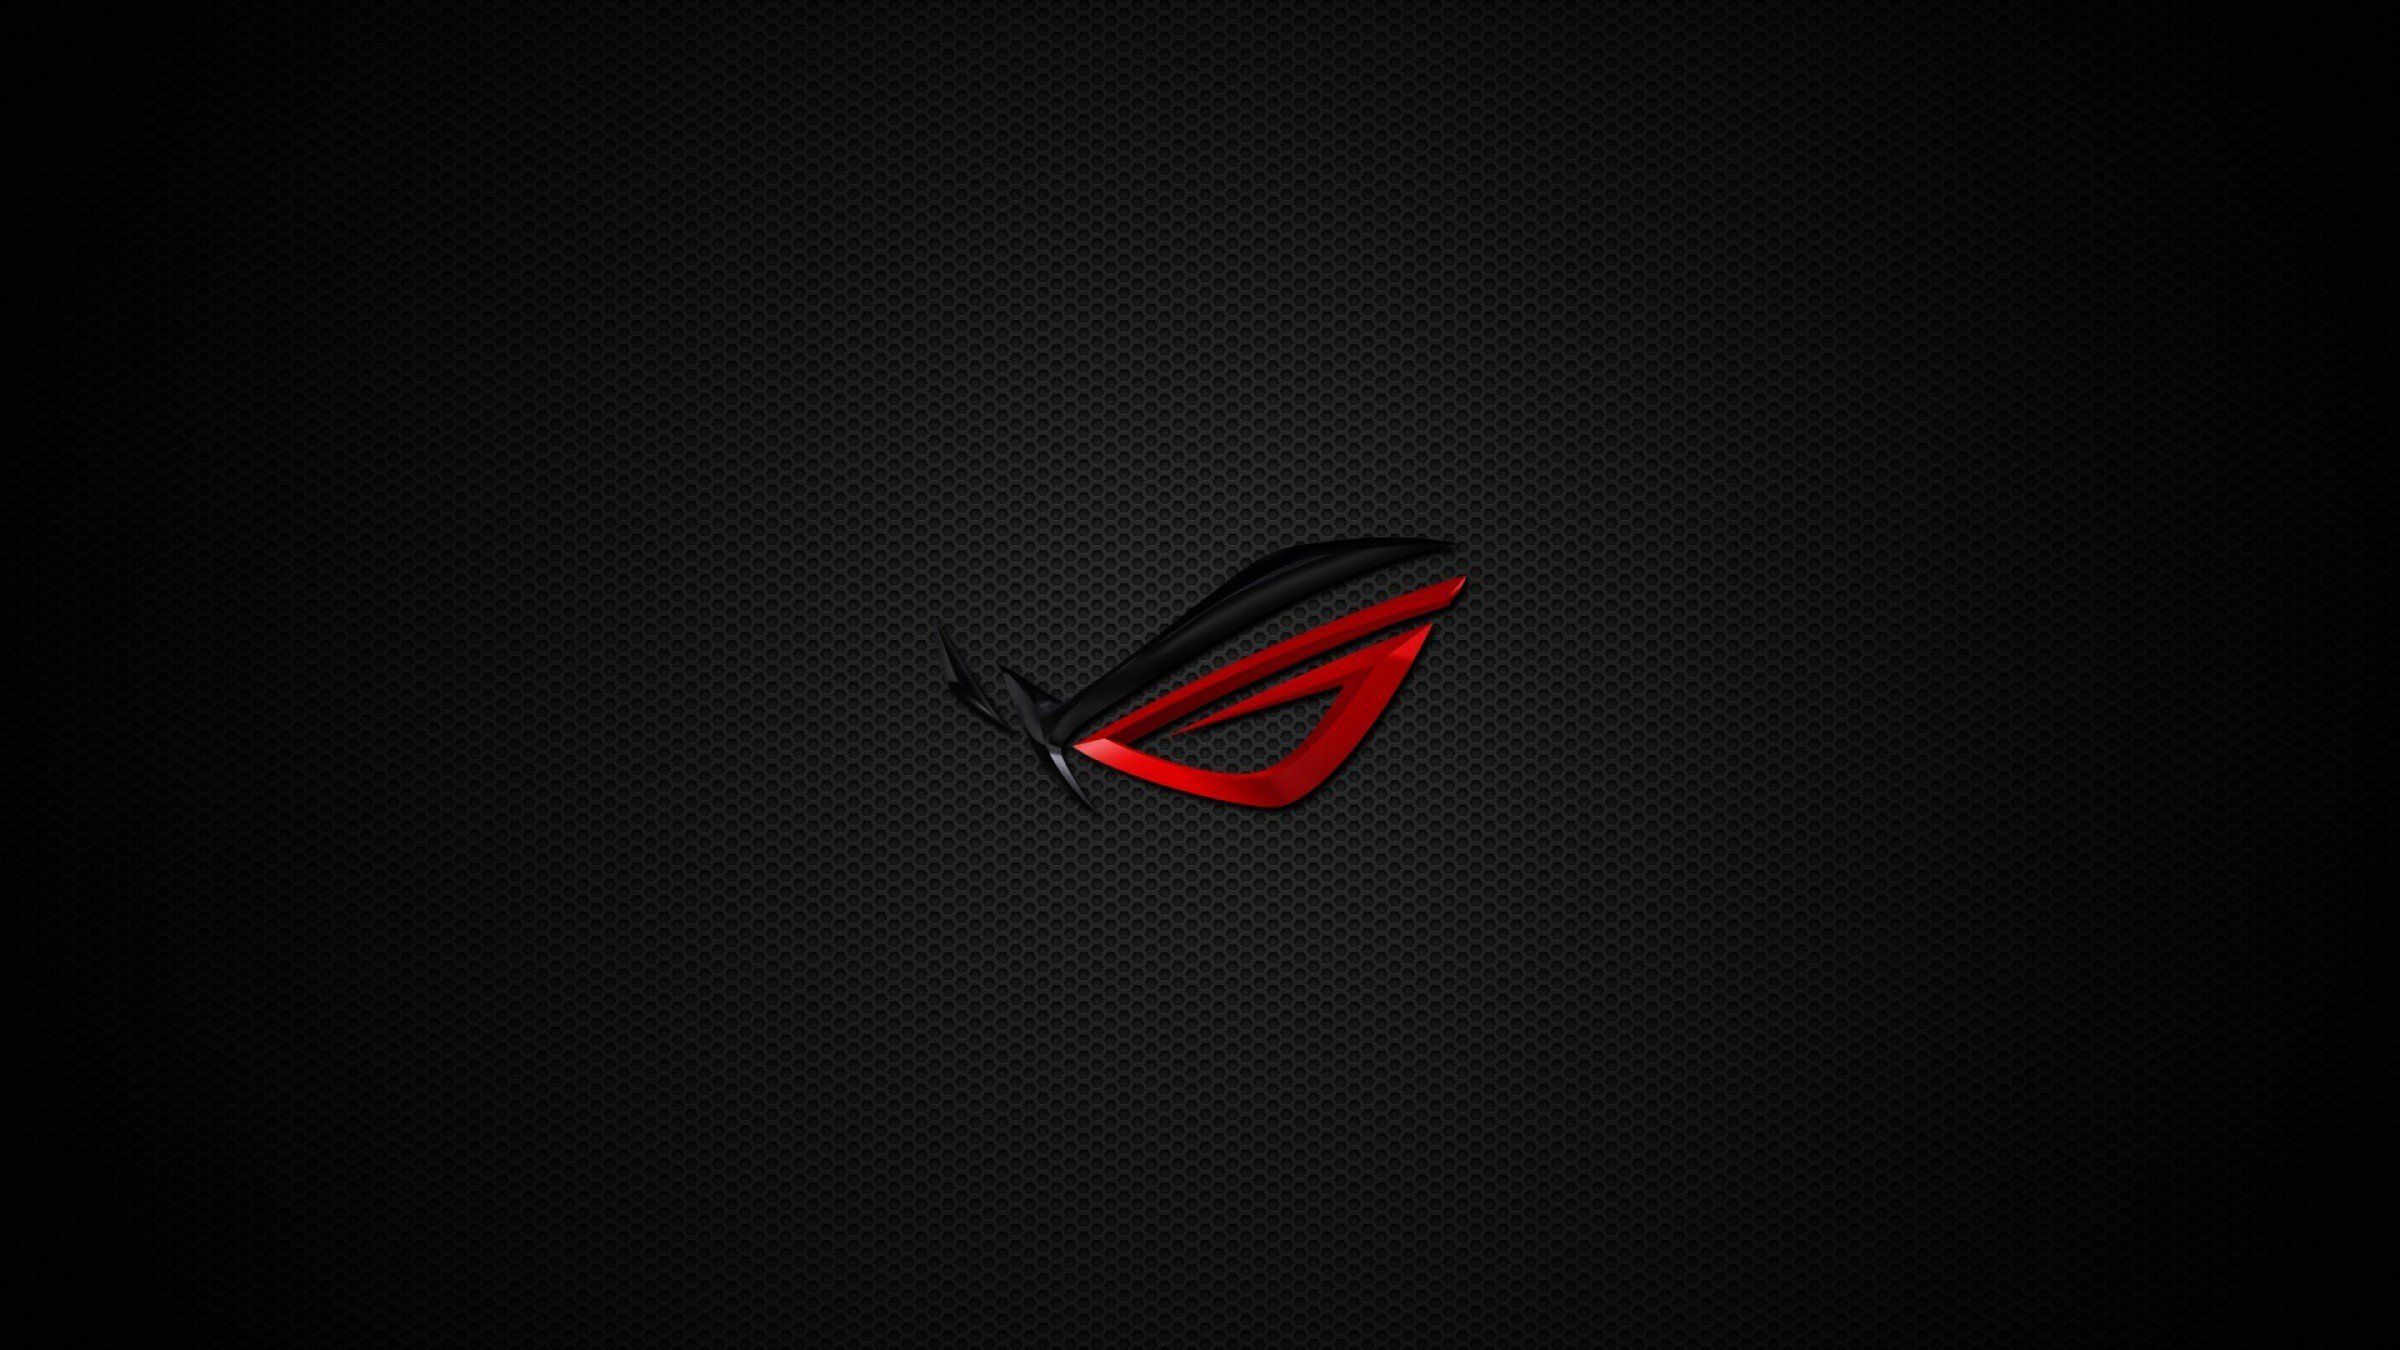 Gallery for - asus wallpaper 1366x768